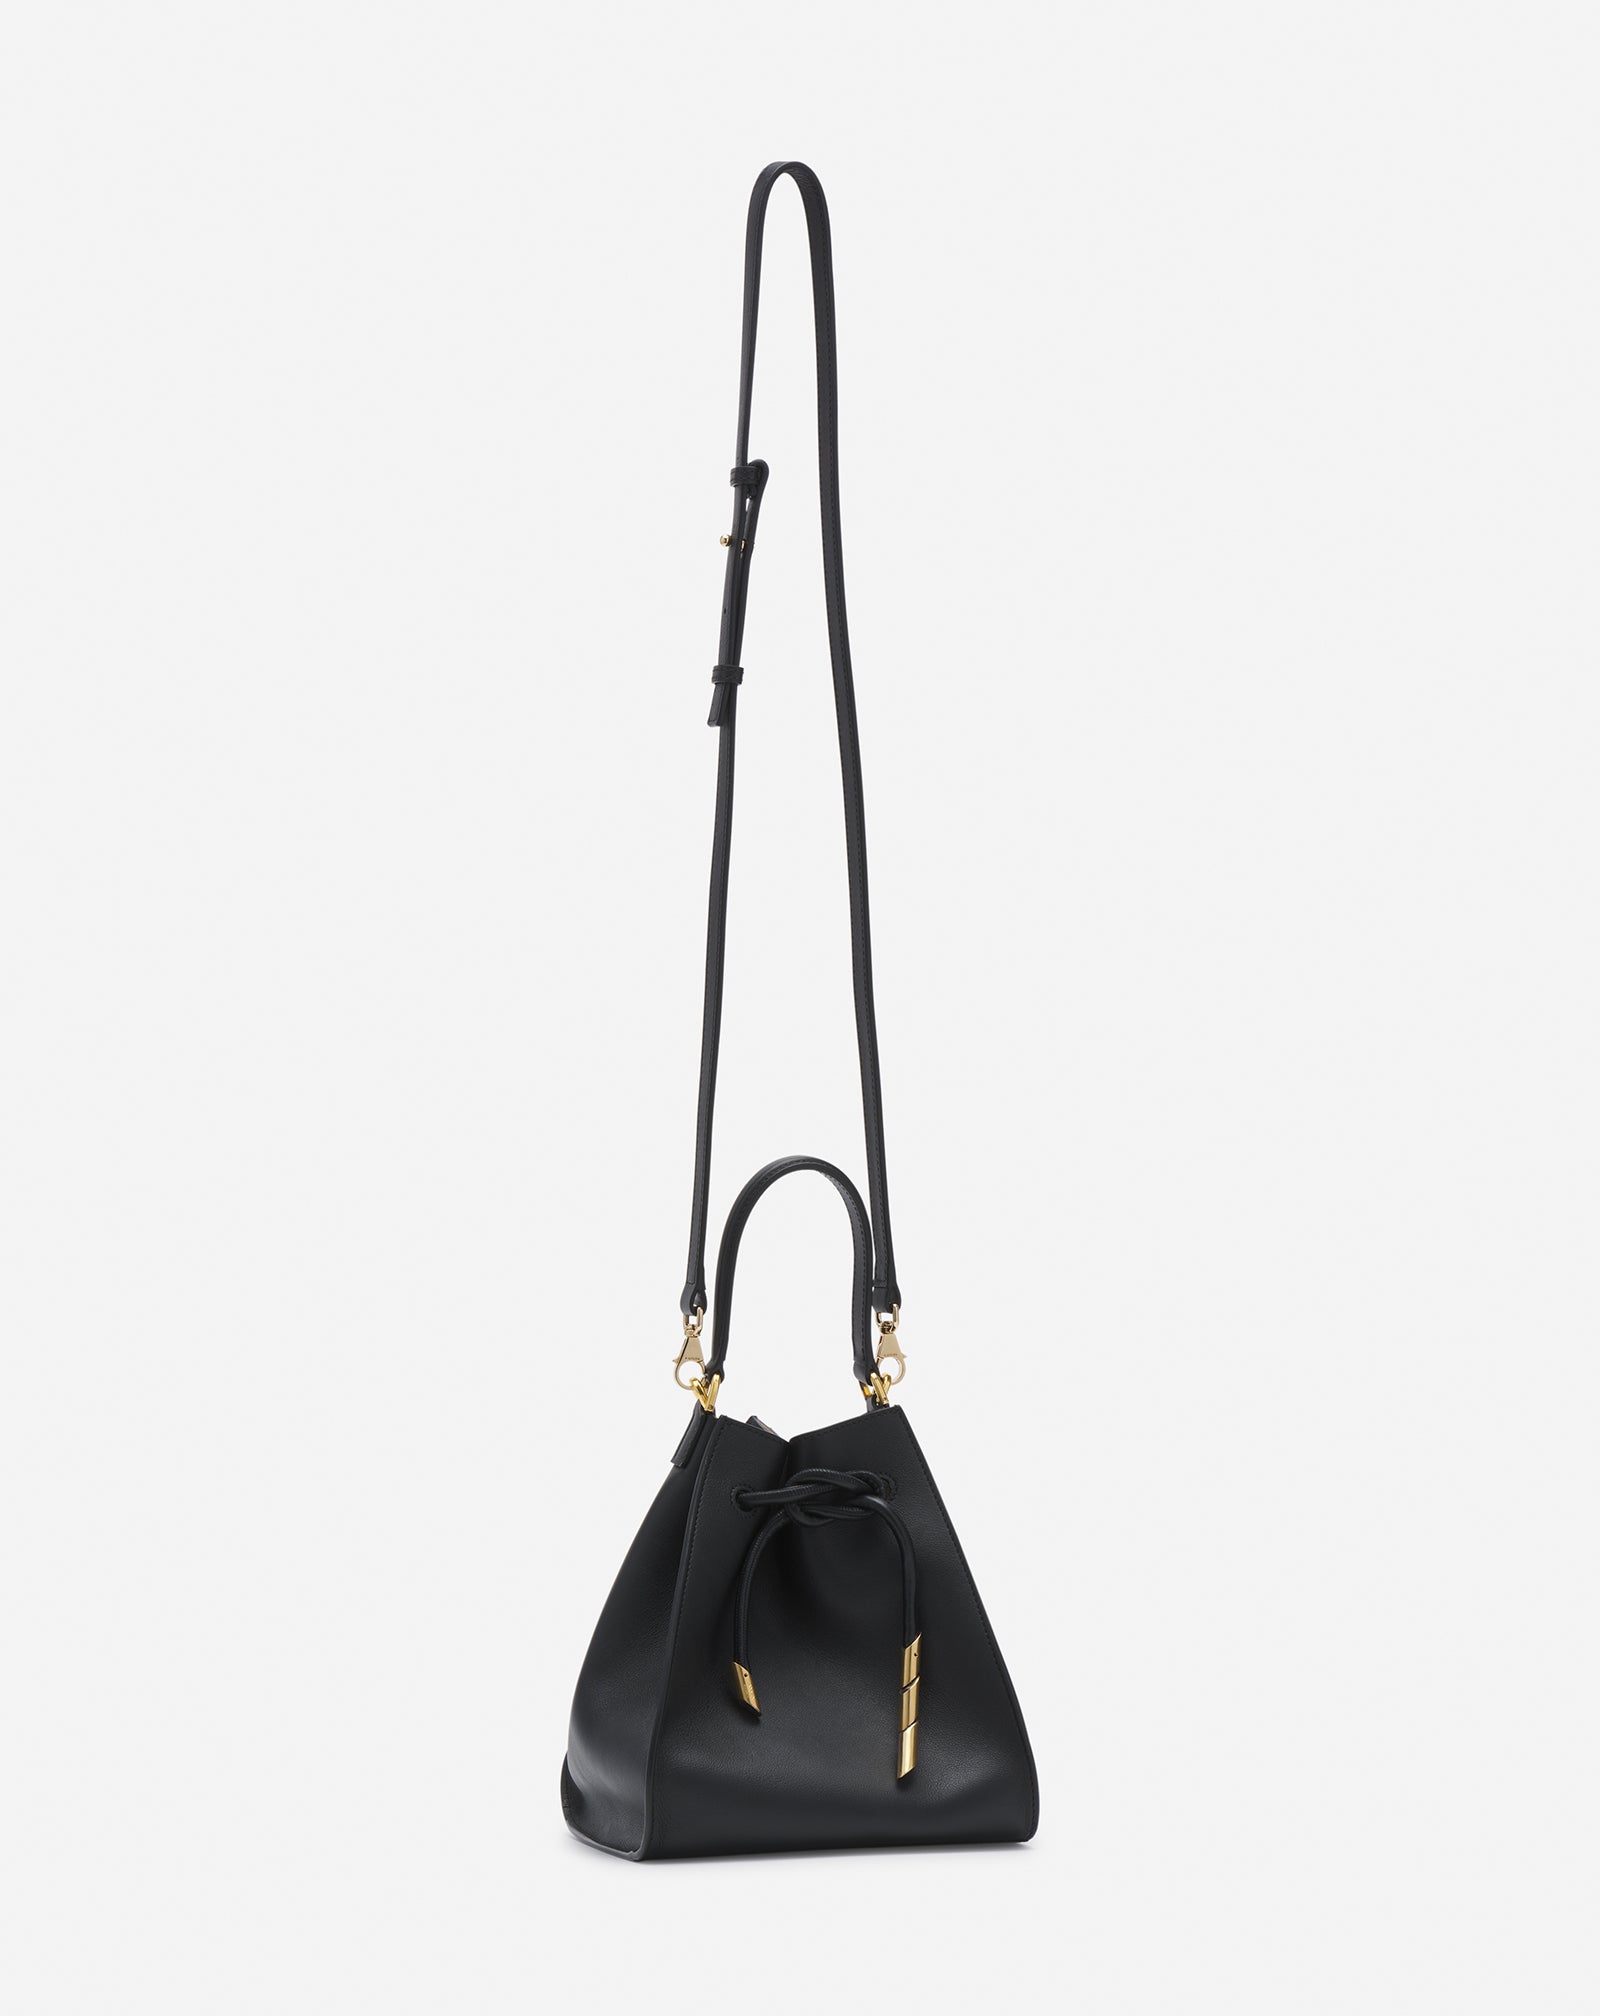 SMALL LEATHER SEQUENCE BY LANVIN HANDBAG, BLACK